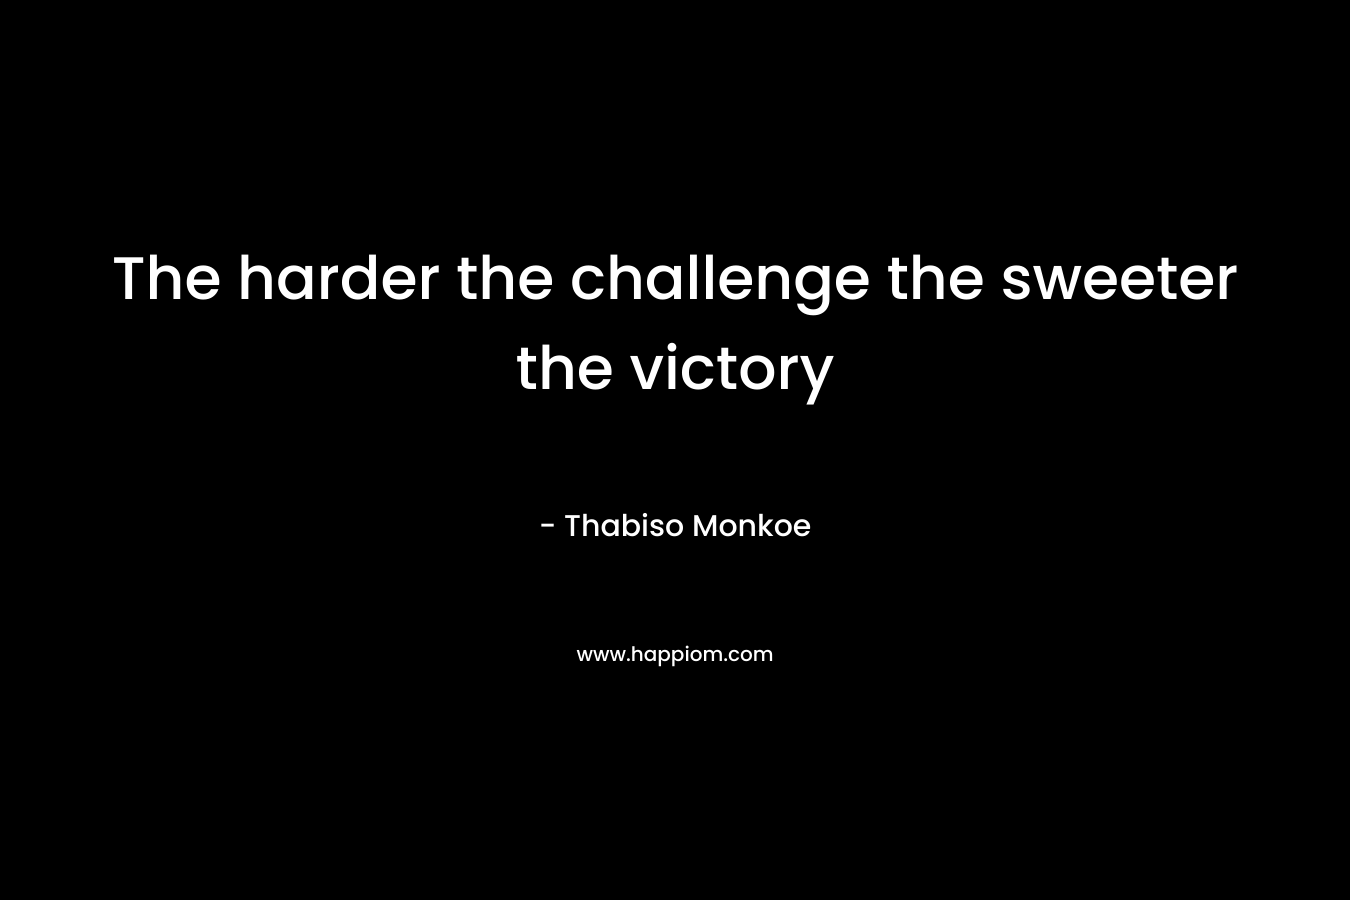 The harder the challenge the sweeter the victory